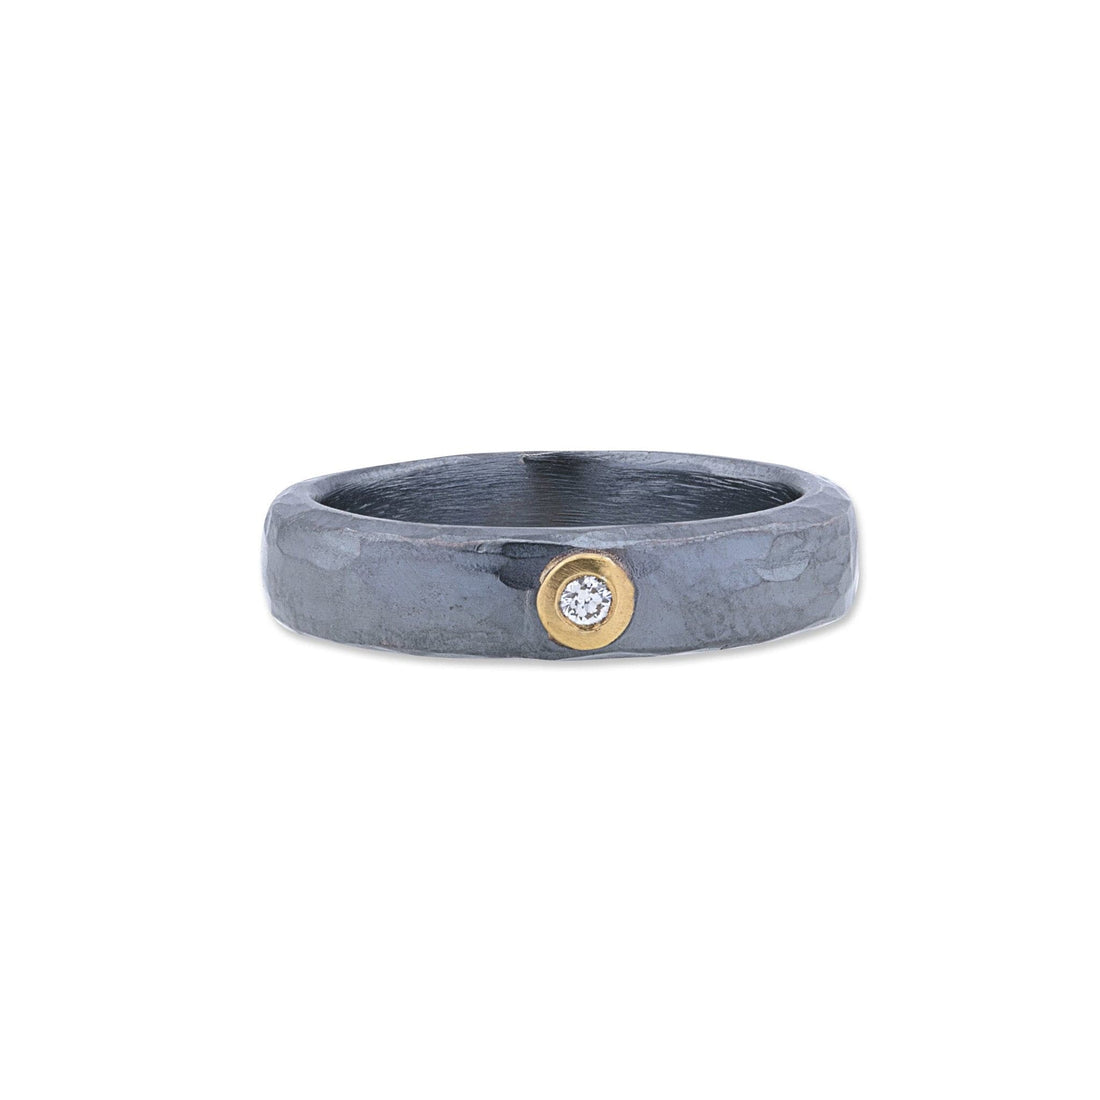  Hammered Single Diamond Stockholm Ring by Lika Behar Oxidized Sterling Silver